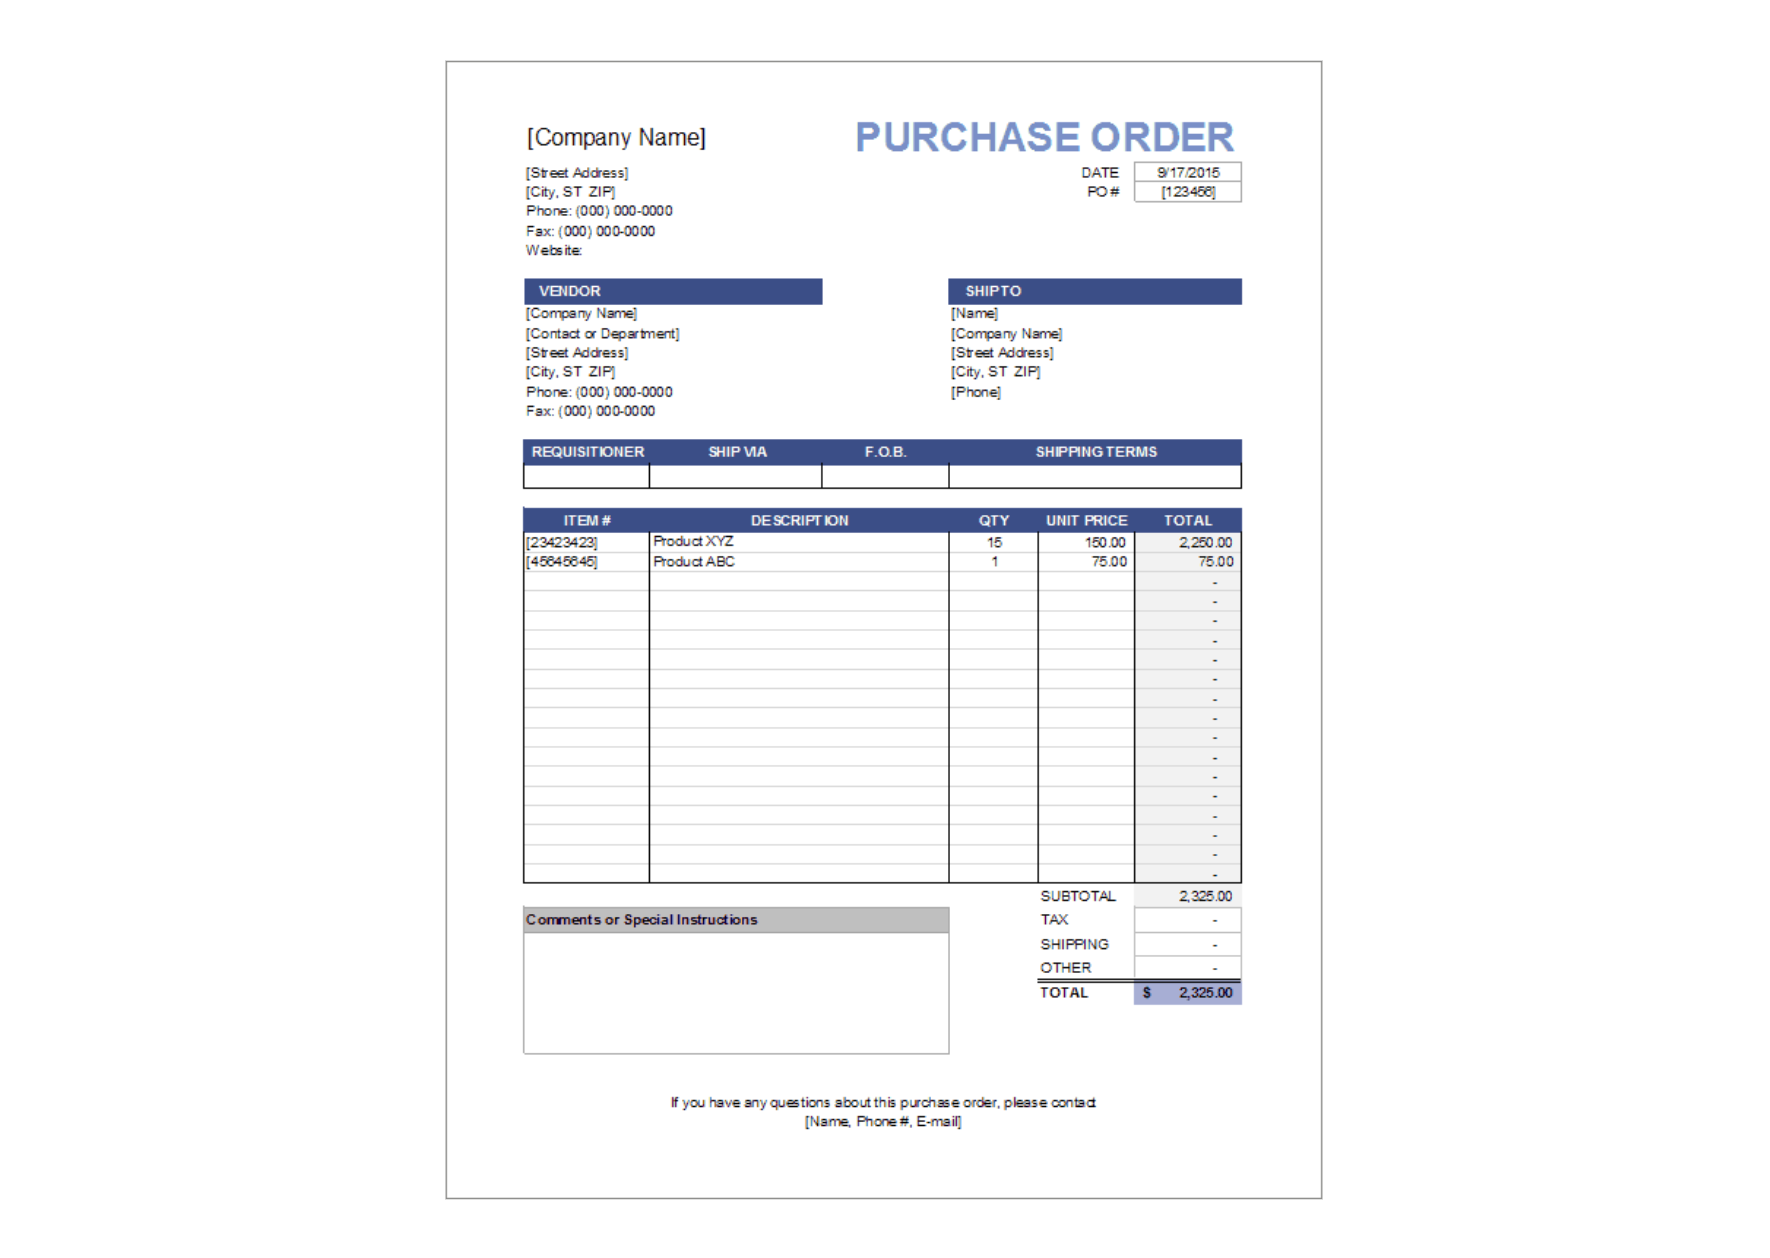 The Purchase Order Process - Are You Getting It Right?